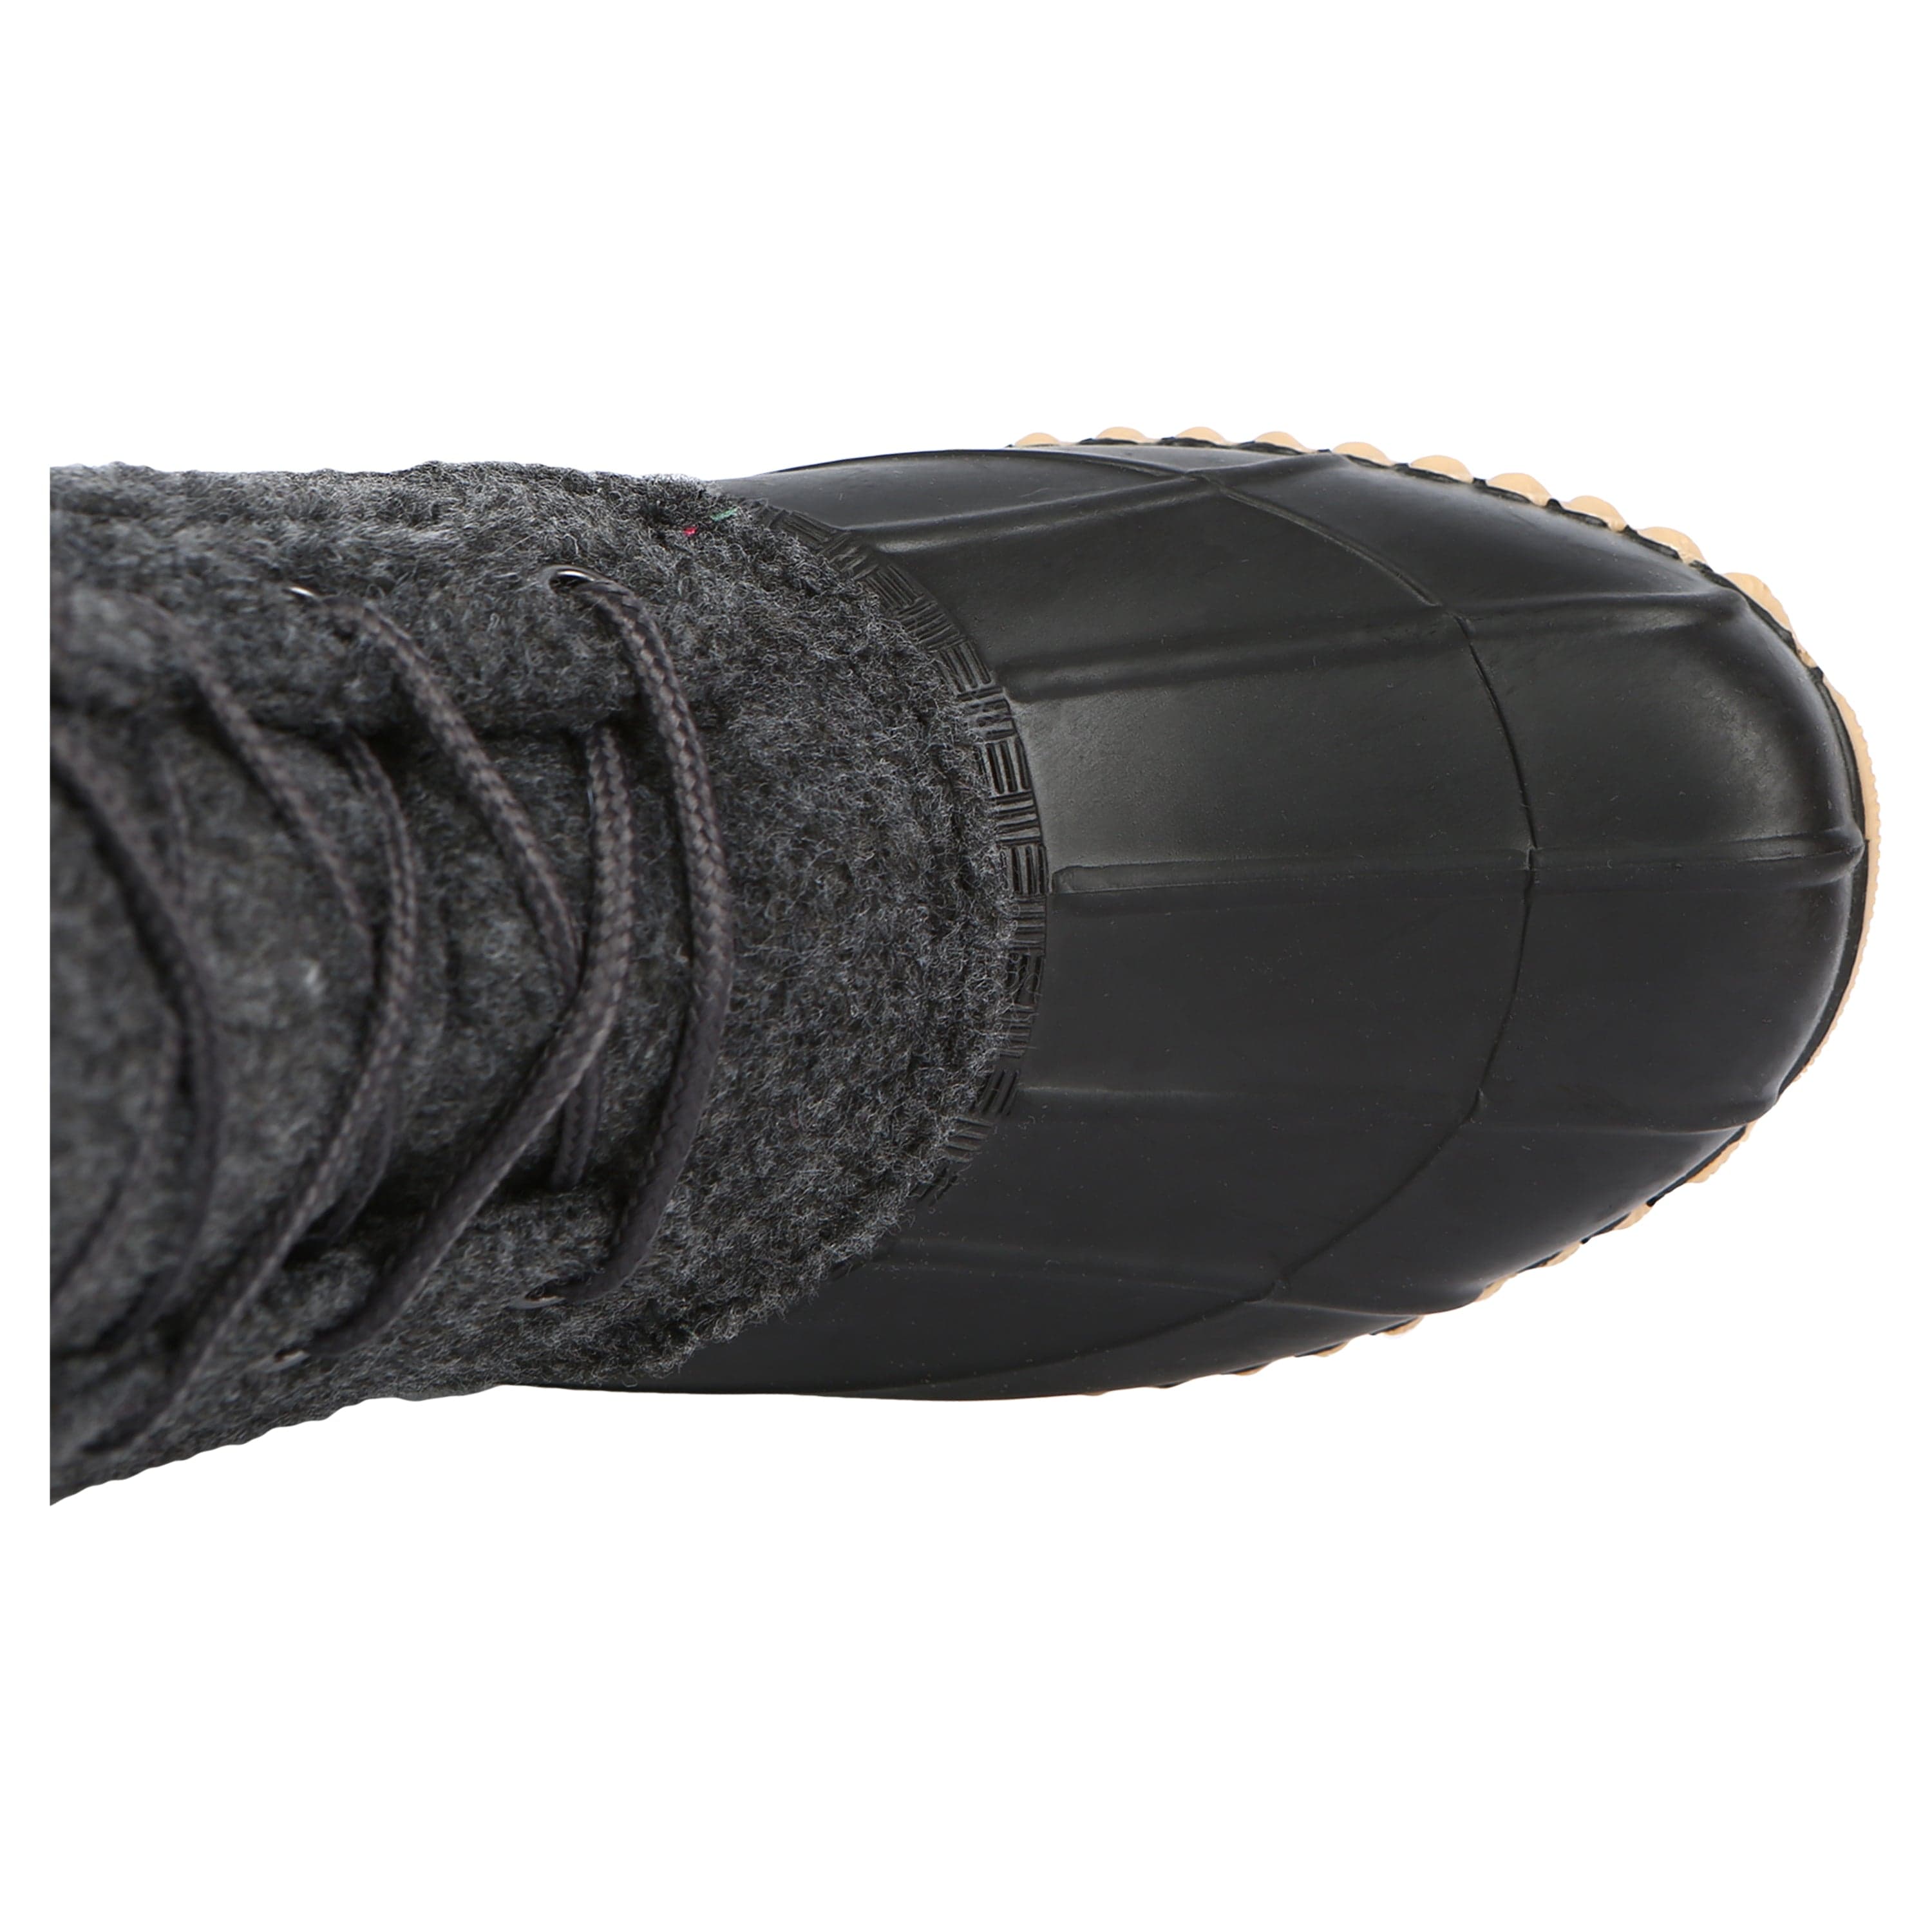 Women's Sutton Cold Weather Fashion Boot - Northside USA